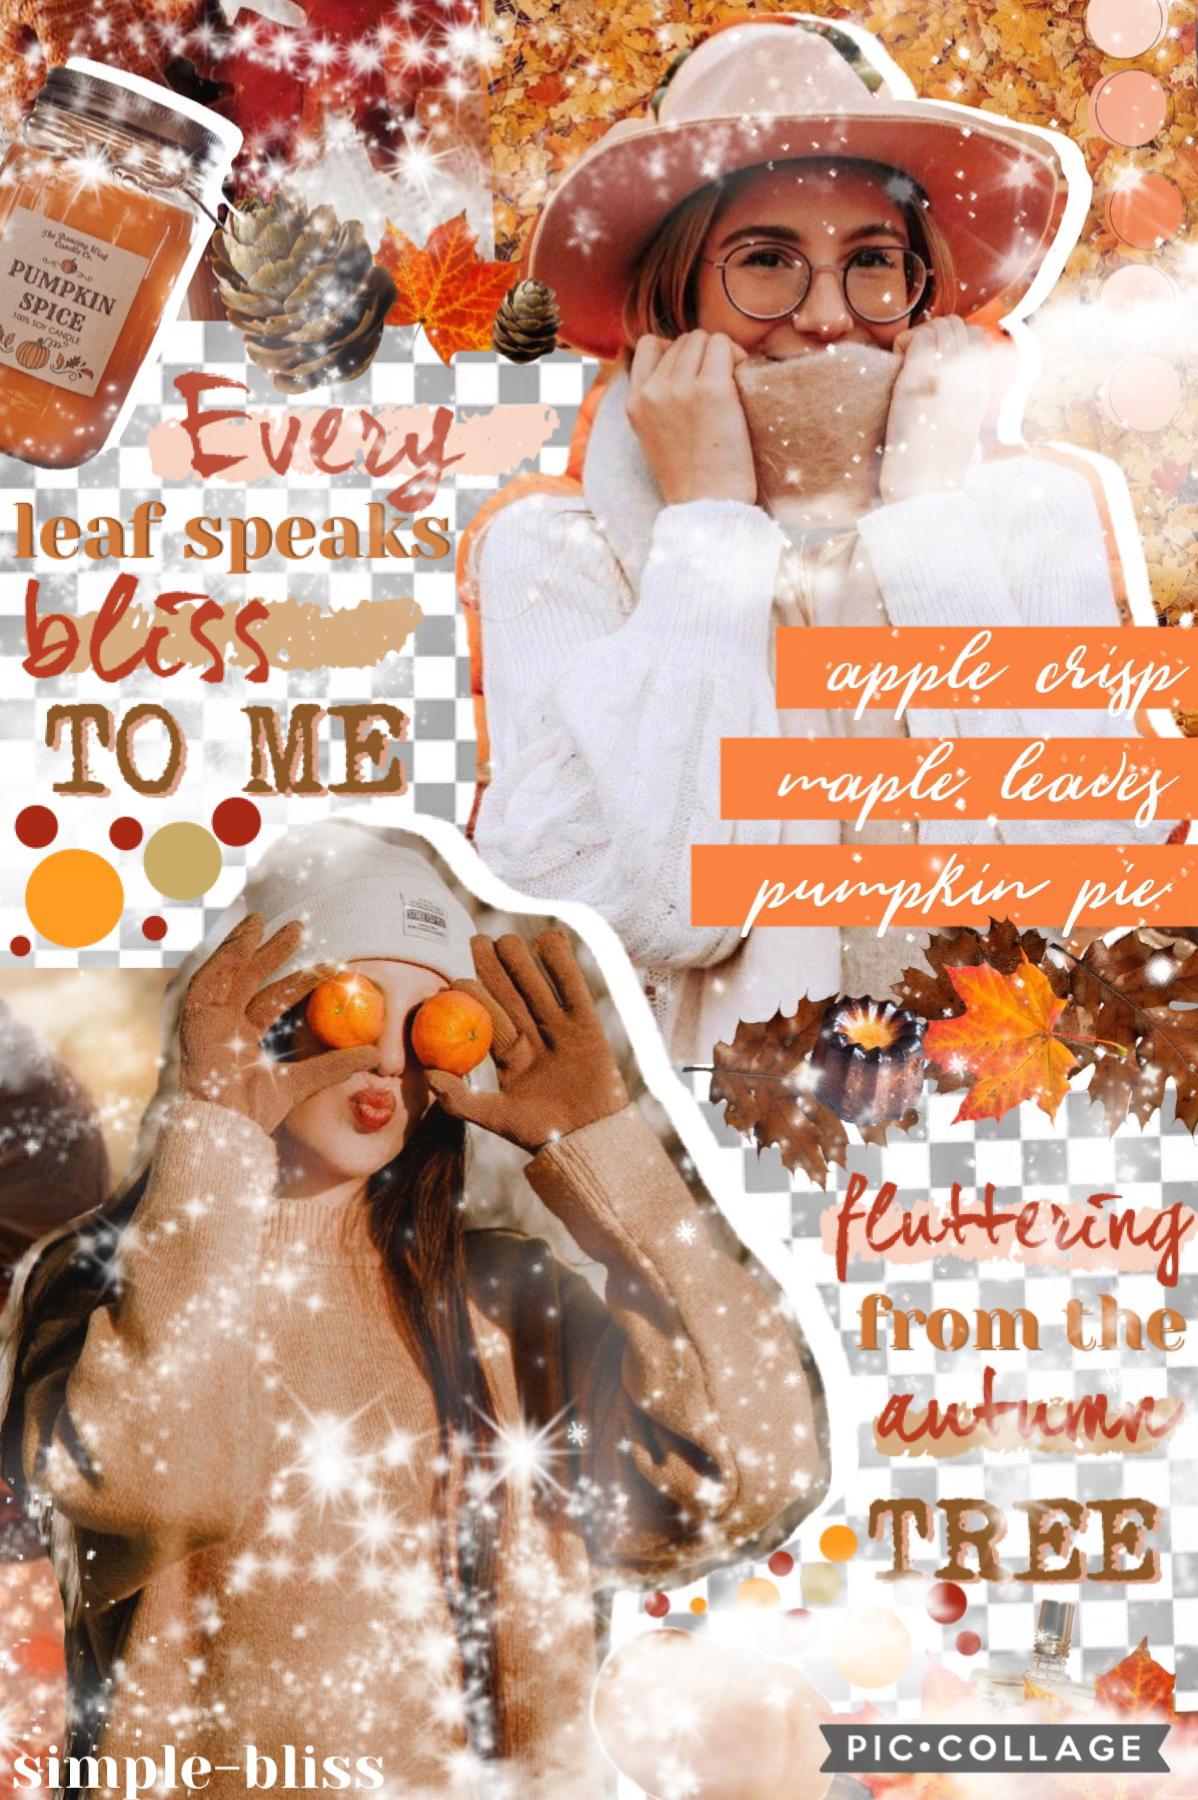 🍊10•4•22🍊(TAP)
Hiiii I’m so sorry this post is a little late! 
I’ve come down with a cold and my nose is just so stuffed up 🤧
Anyway, hope you’re staying cozy! Fall is sooo pretty!
QOTD: Fav fall thing?
AOTD: the smell of leaves 🍁 